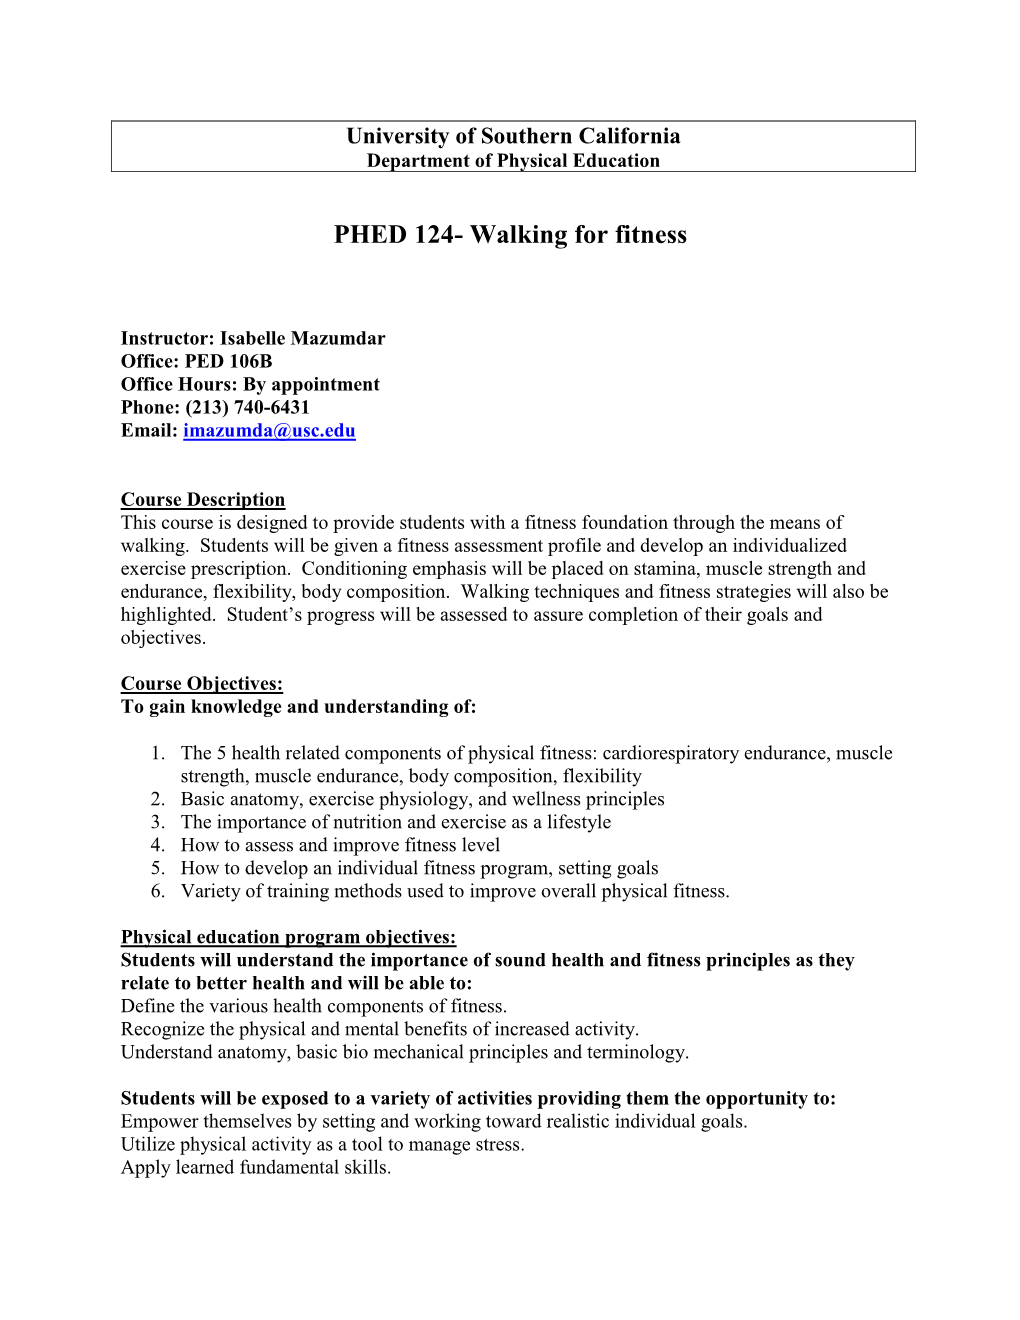 PHED 124- Walking for Fitness